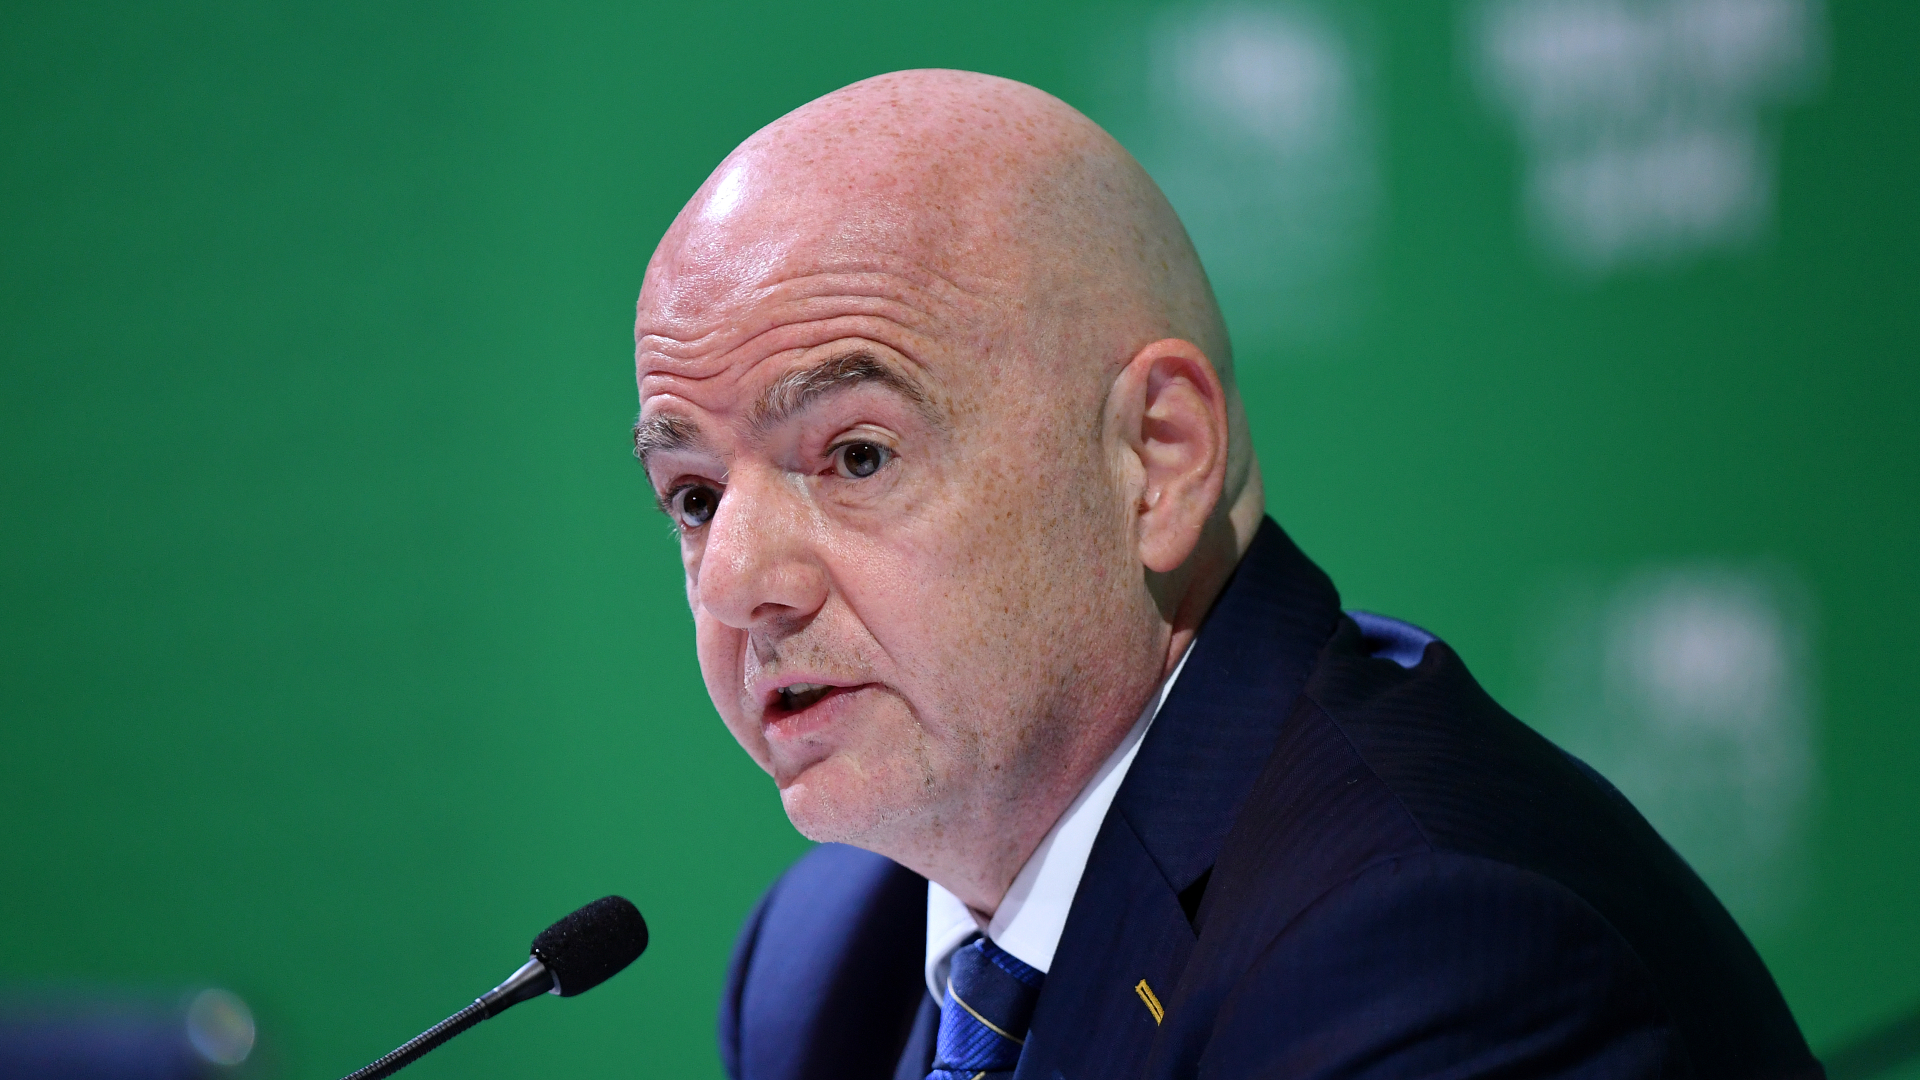 Infantino re-elected FIFA president, telling critics 'I love you all